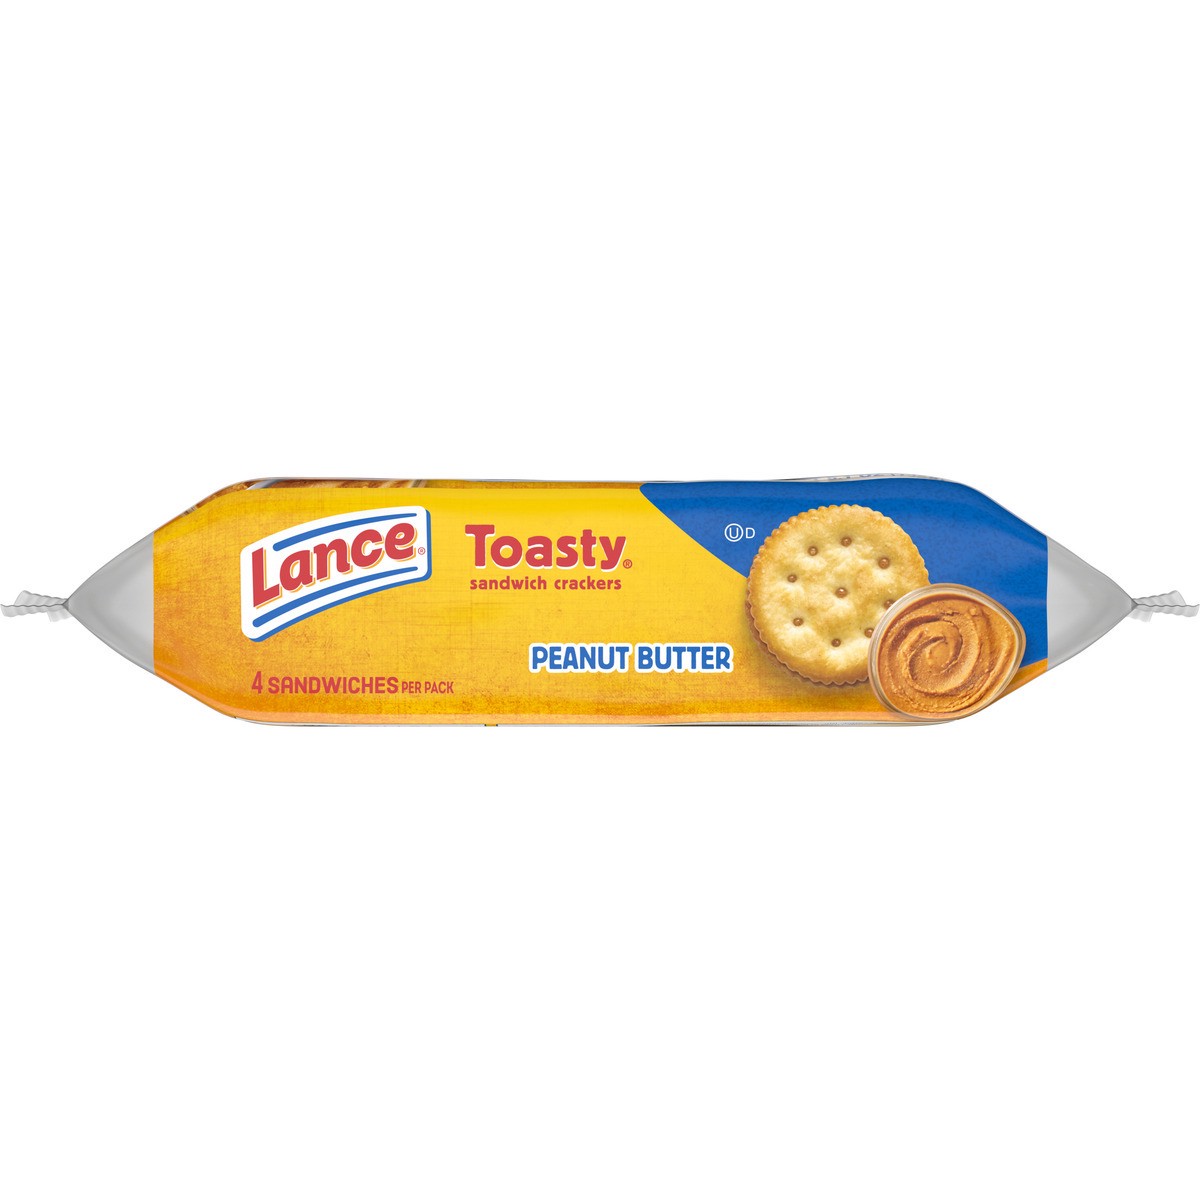 slide 4 of 11, Lance Sandwich Crackers, Toasty Peanut Butter, 6 Individually Wrapped Packs, 4 Sandwiches Each, 5.1 oz